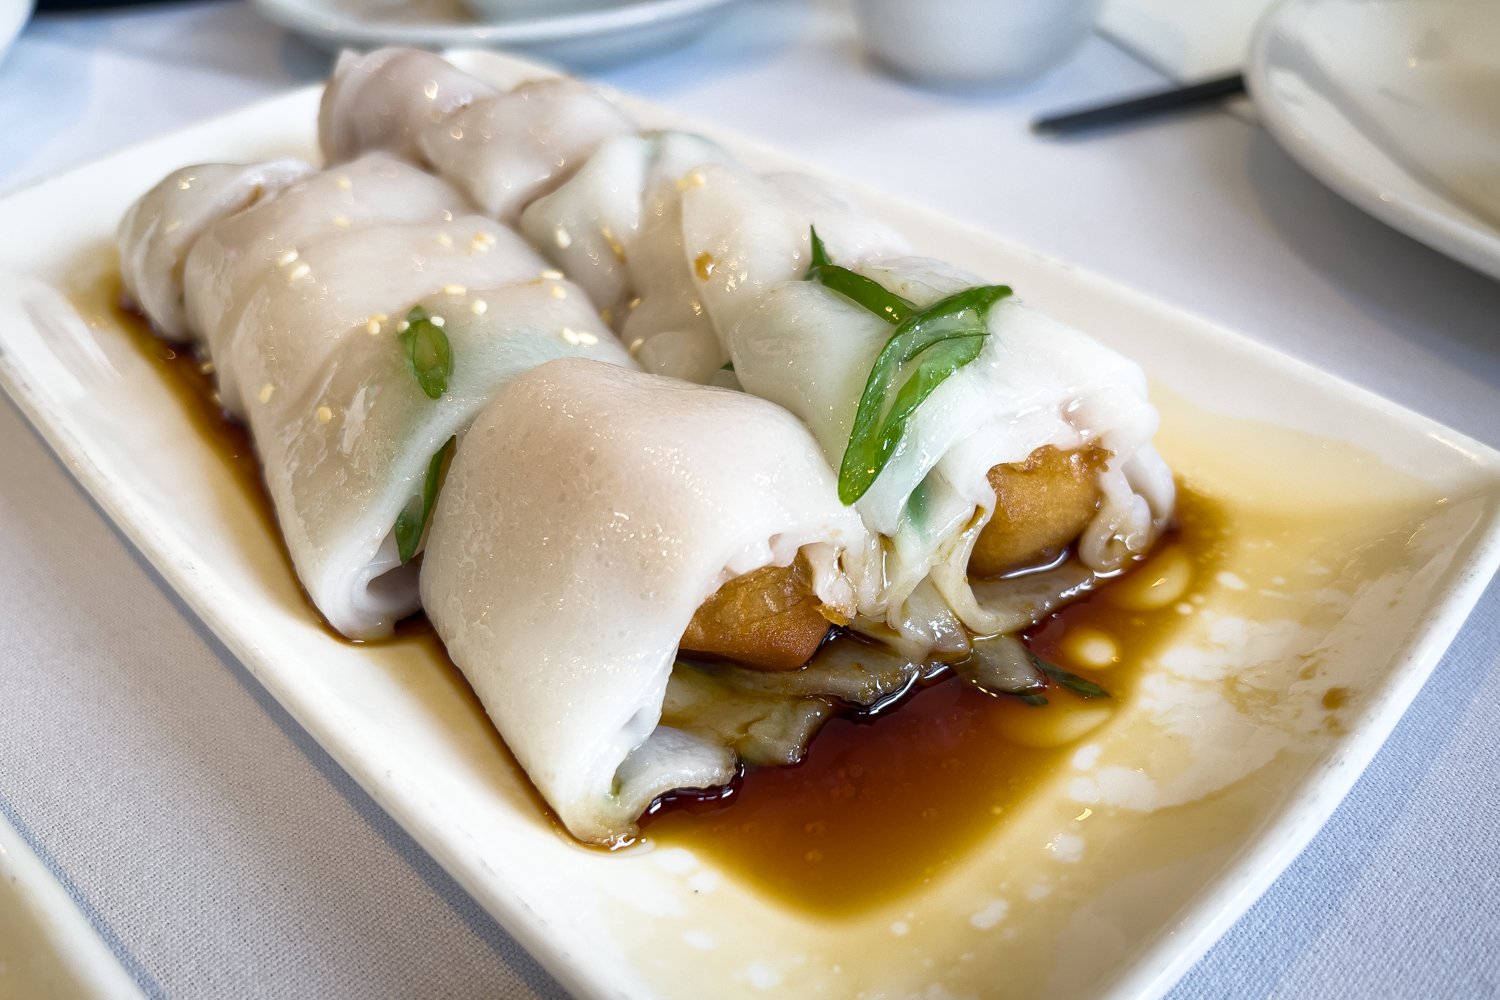  Fried dough cheung fun: My go-to cheung fun dish now I can't have the prawn one anymore. 